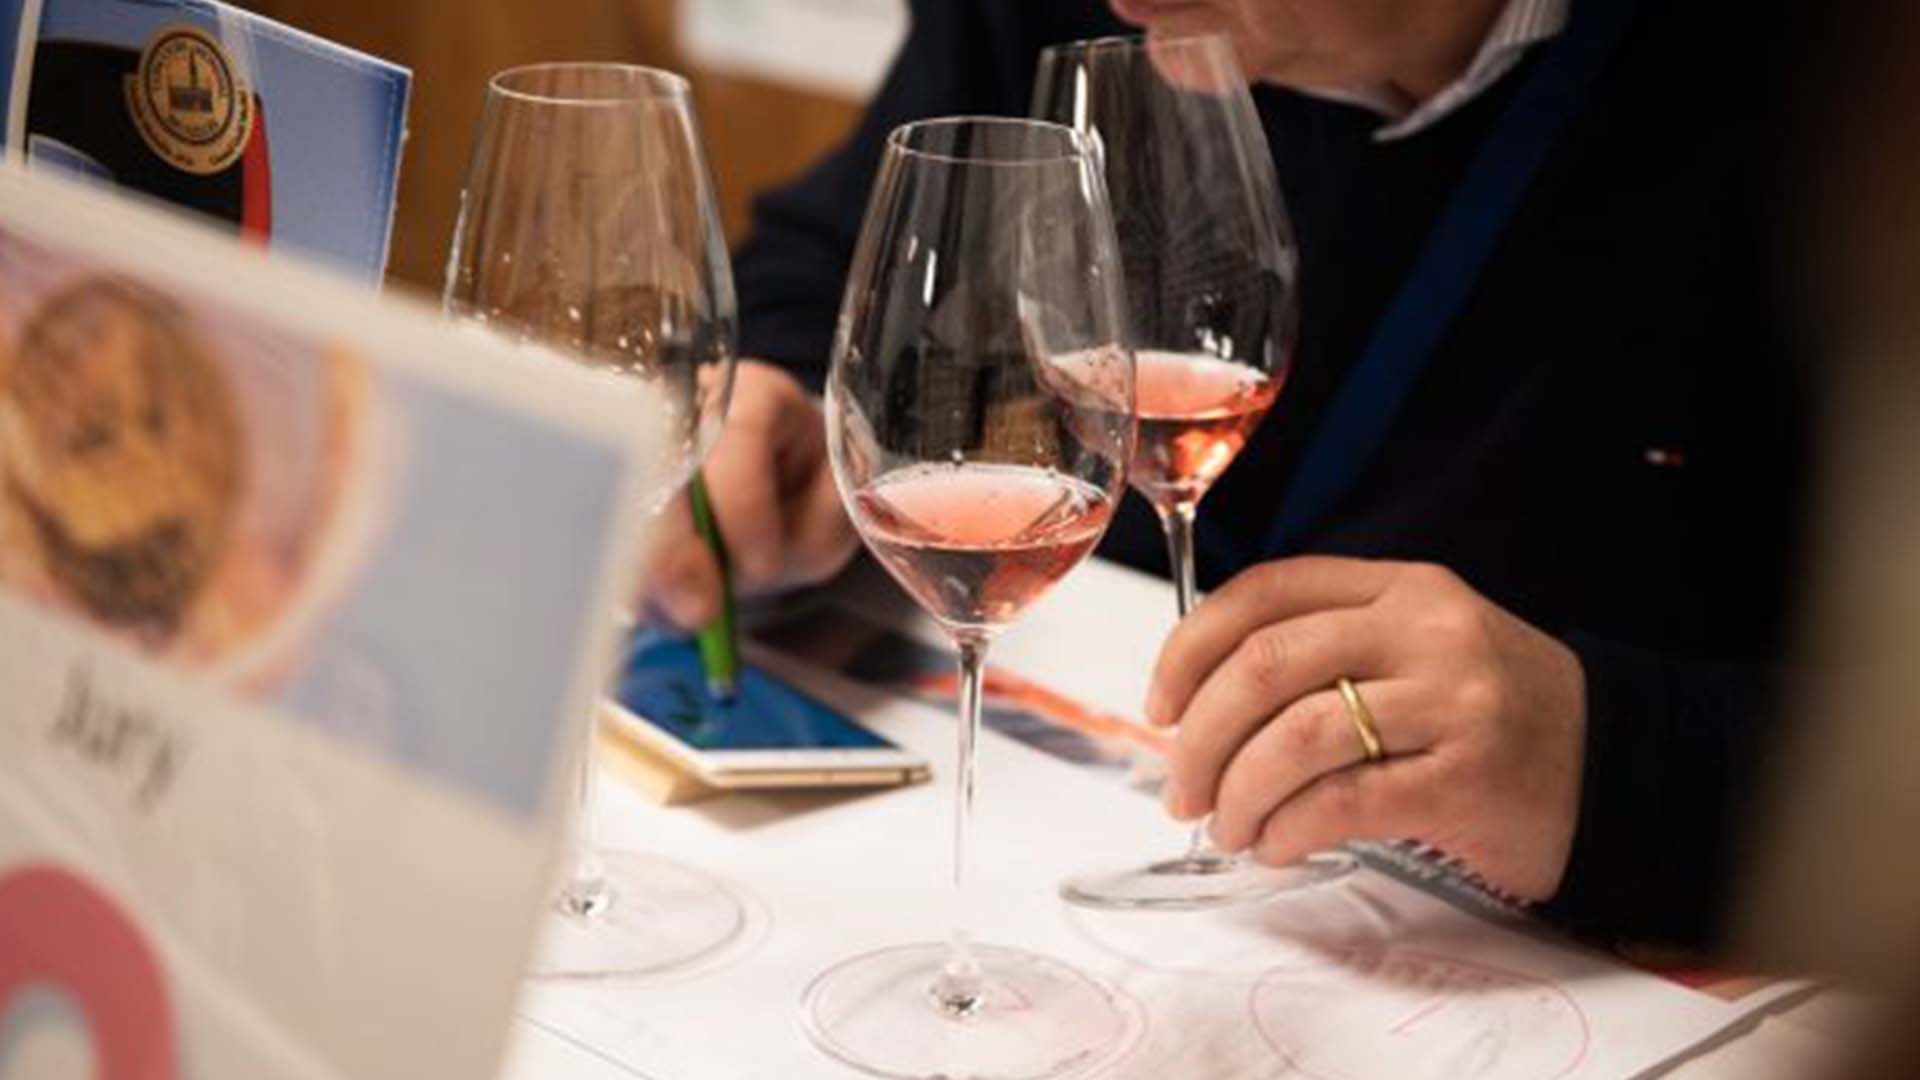 Rosé mania, the best in the world according to the “Concours Mondial de Bruxelles”